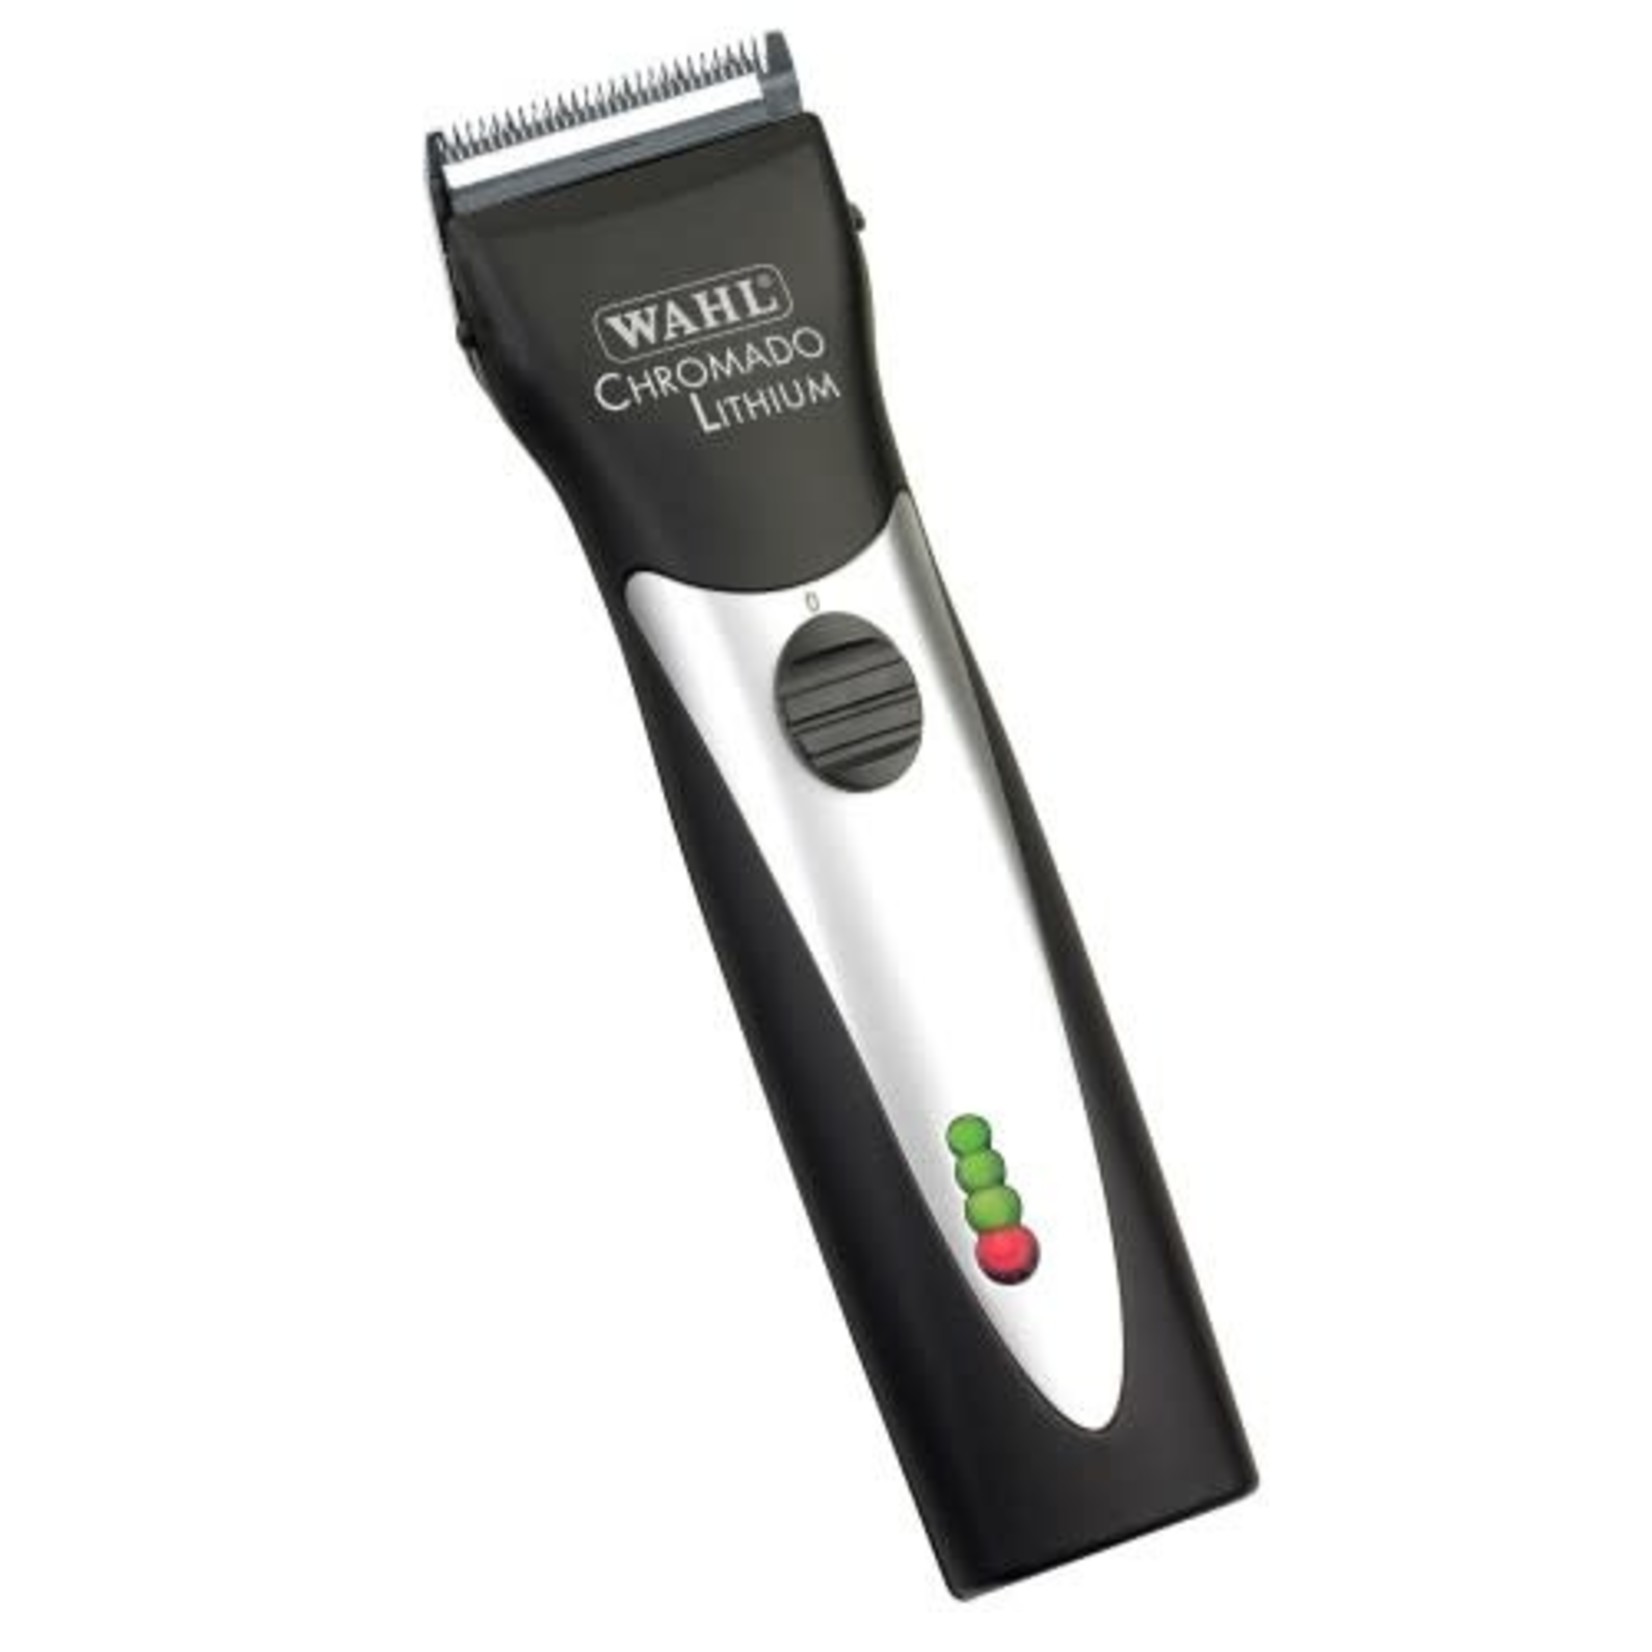 WAHL WAHL Lithium Chromado Clippers